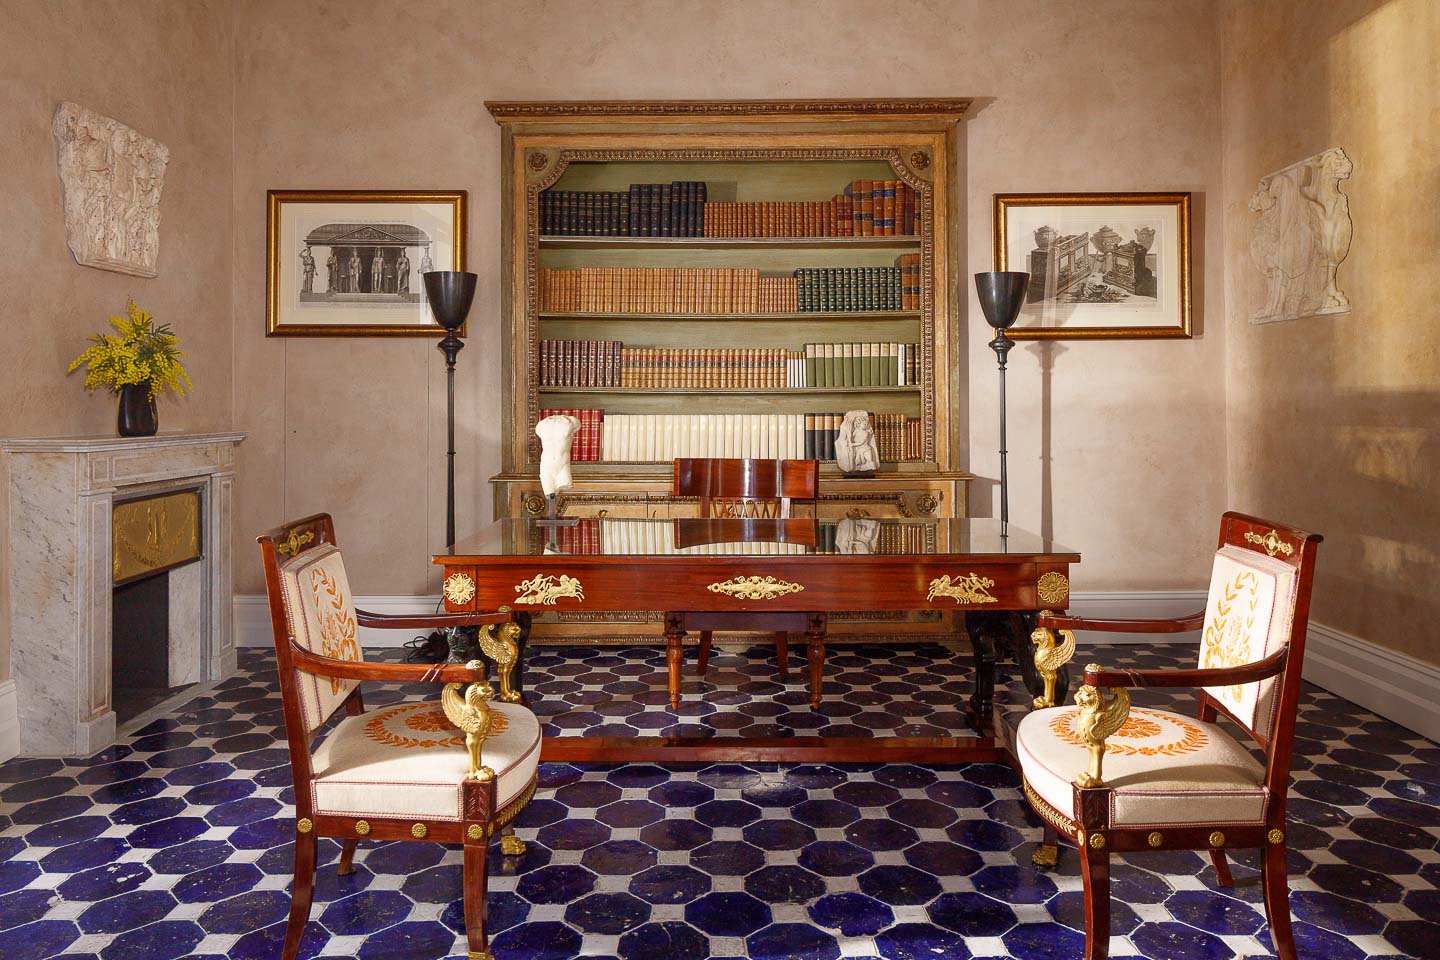 Villa Astor study room Benedetto Croce exquisite furniture antique collection Jacues Garciy exclusive accommodation guest stay summer Italian holiday vacation